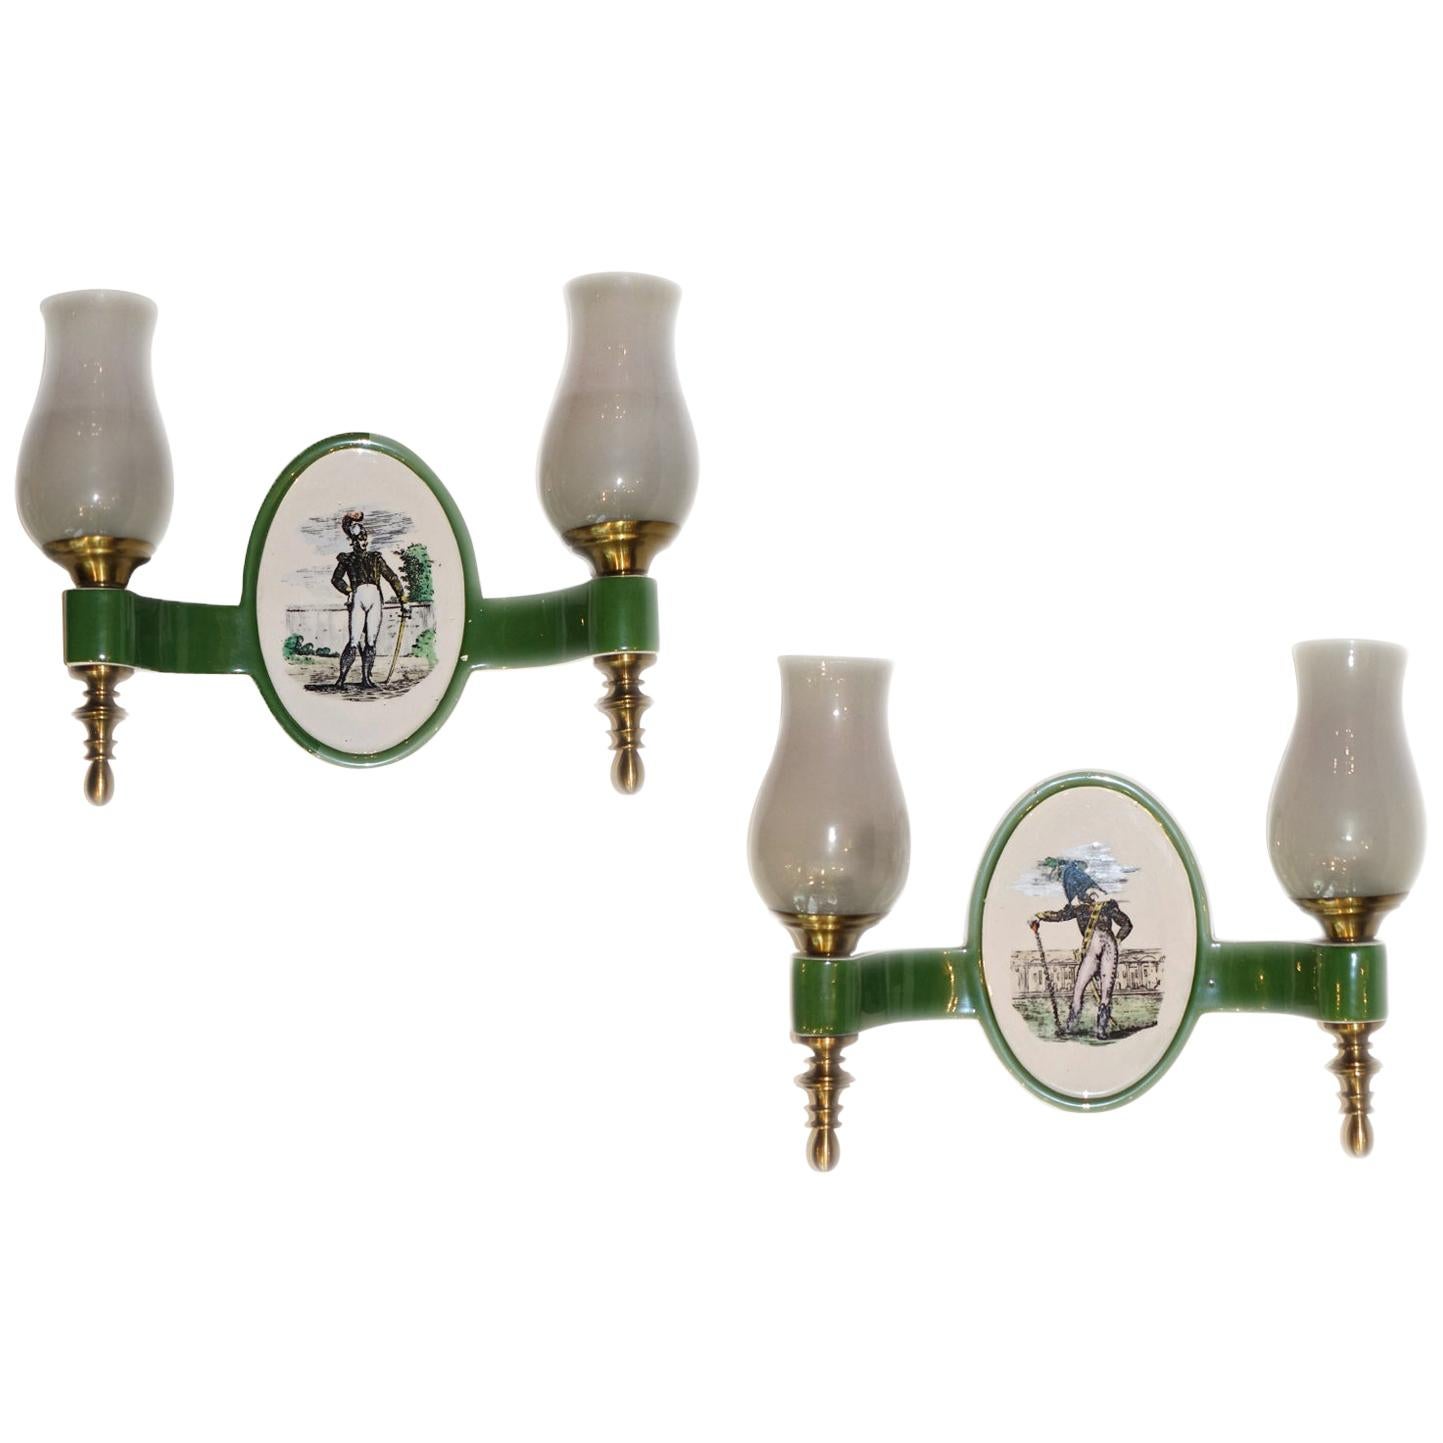 Pair of Porcelain Sconces with Soldiers